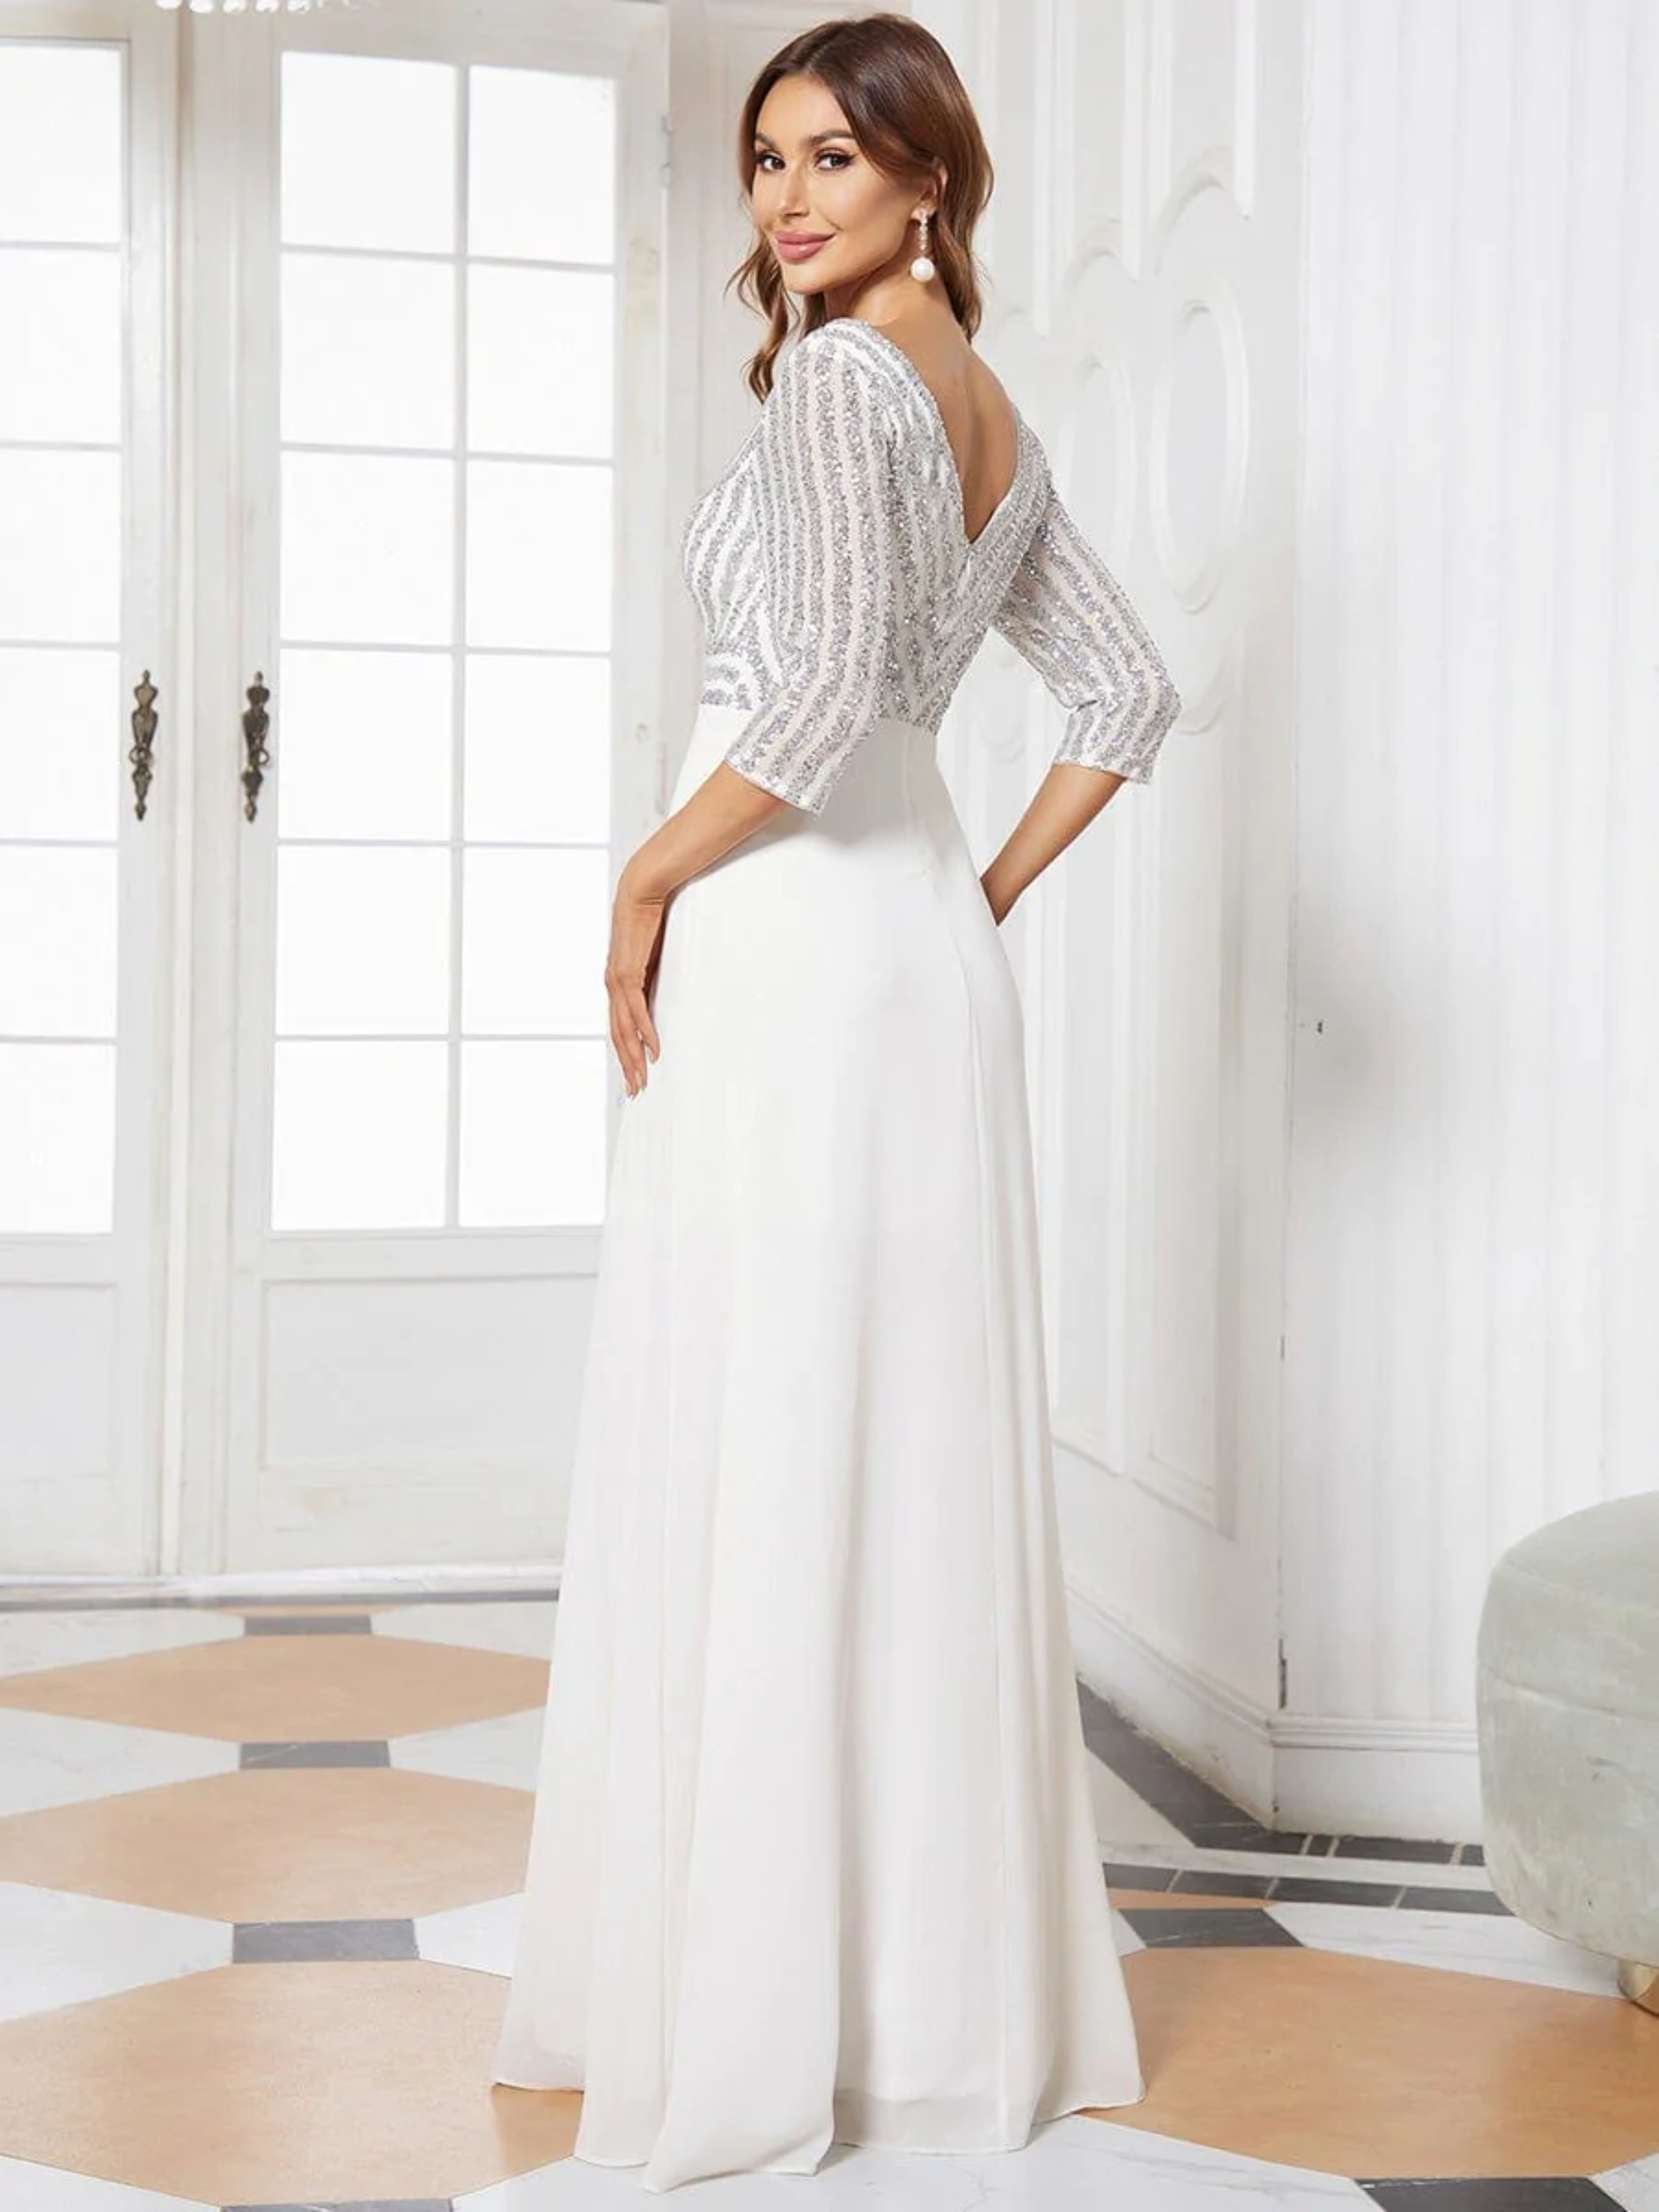 FEATURING A DOUBLE DEEP V NECKLINE, LONG SLEEVES AND A FLOWY A-LINE SKIRT.